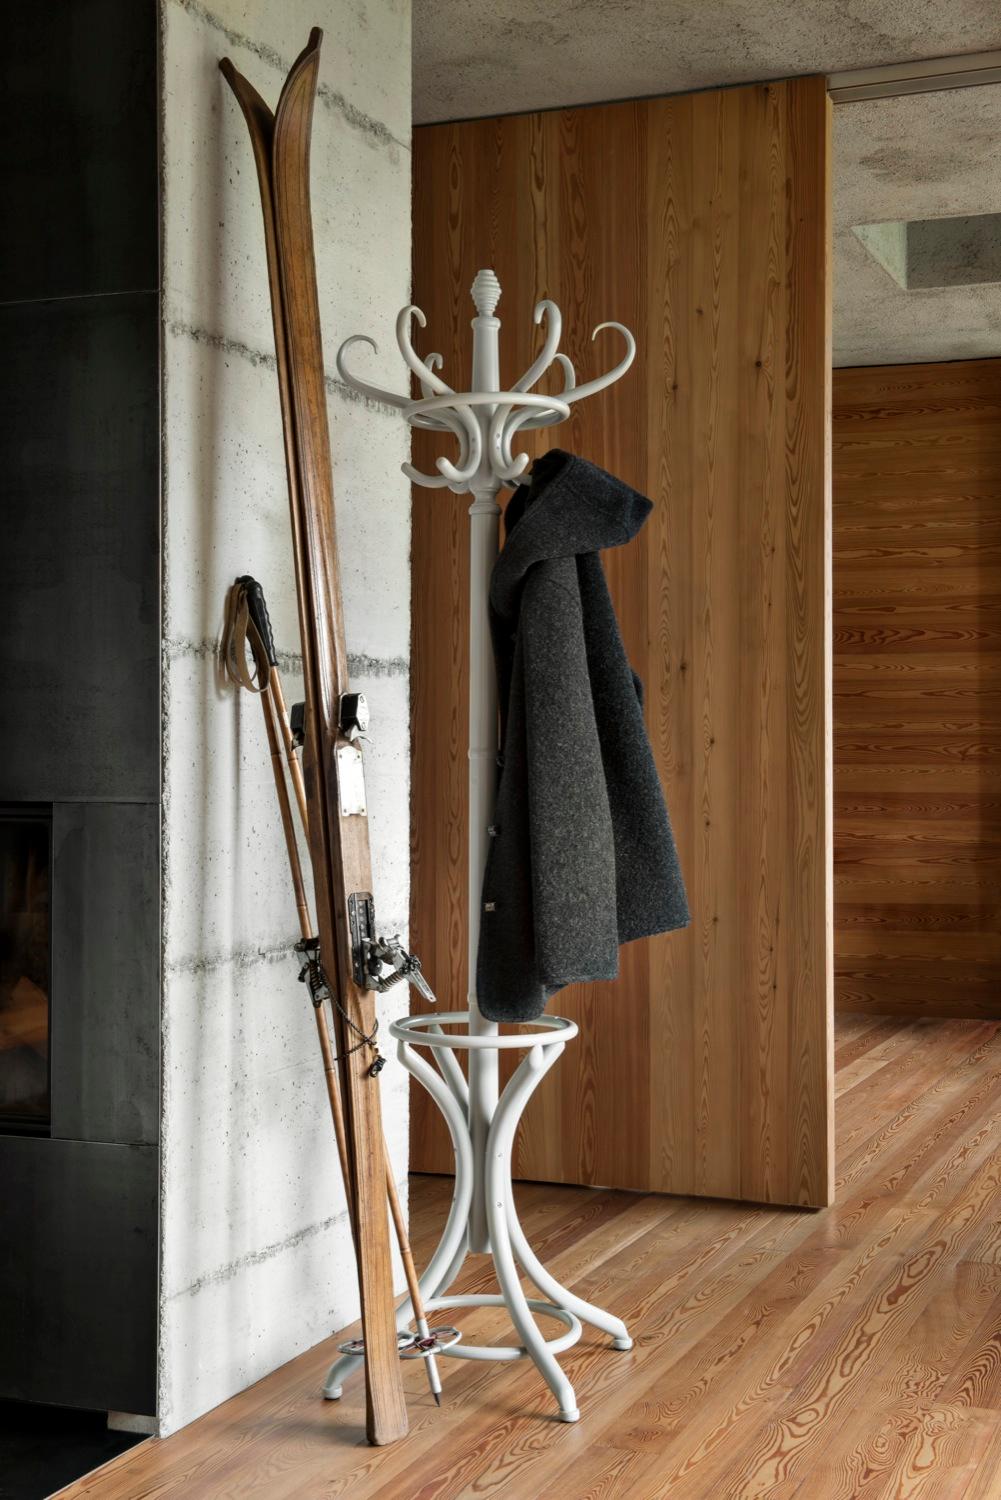 An icon of industrial design Viennese. The suppleness of the bentwood technique gives shape to an elegant beech structure, that perfectly fulfils its purpose as a coat and umbrella stand. A light, timeless item with perfect construction